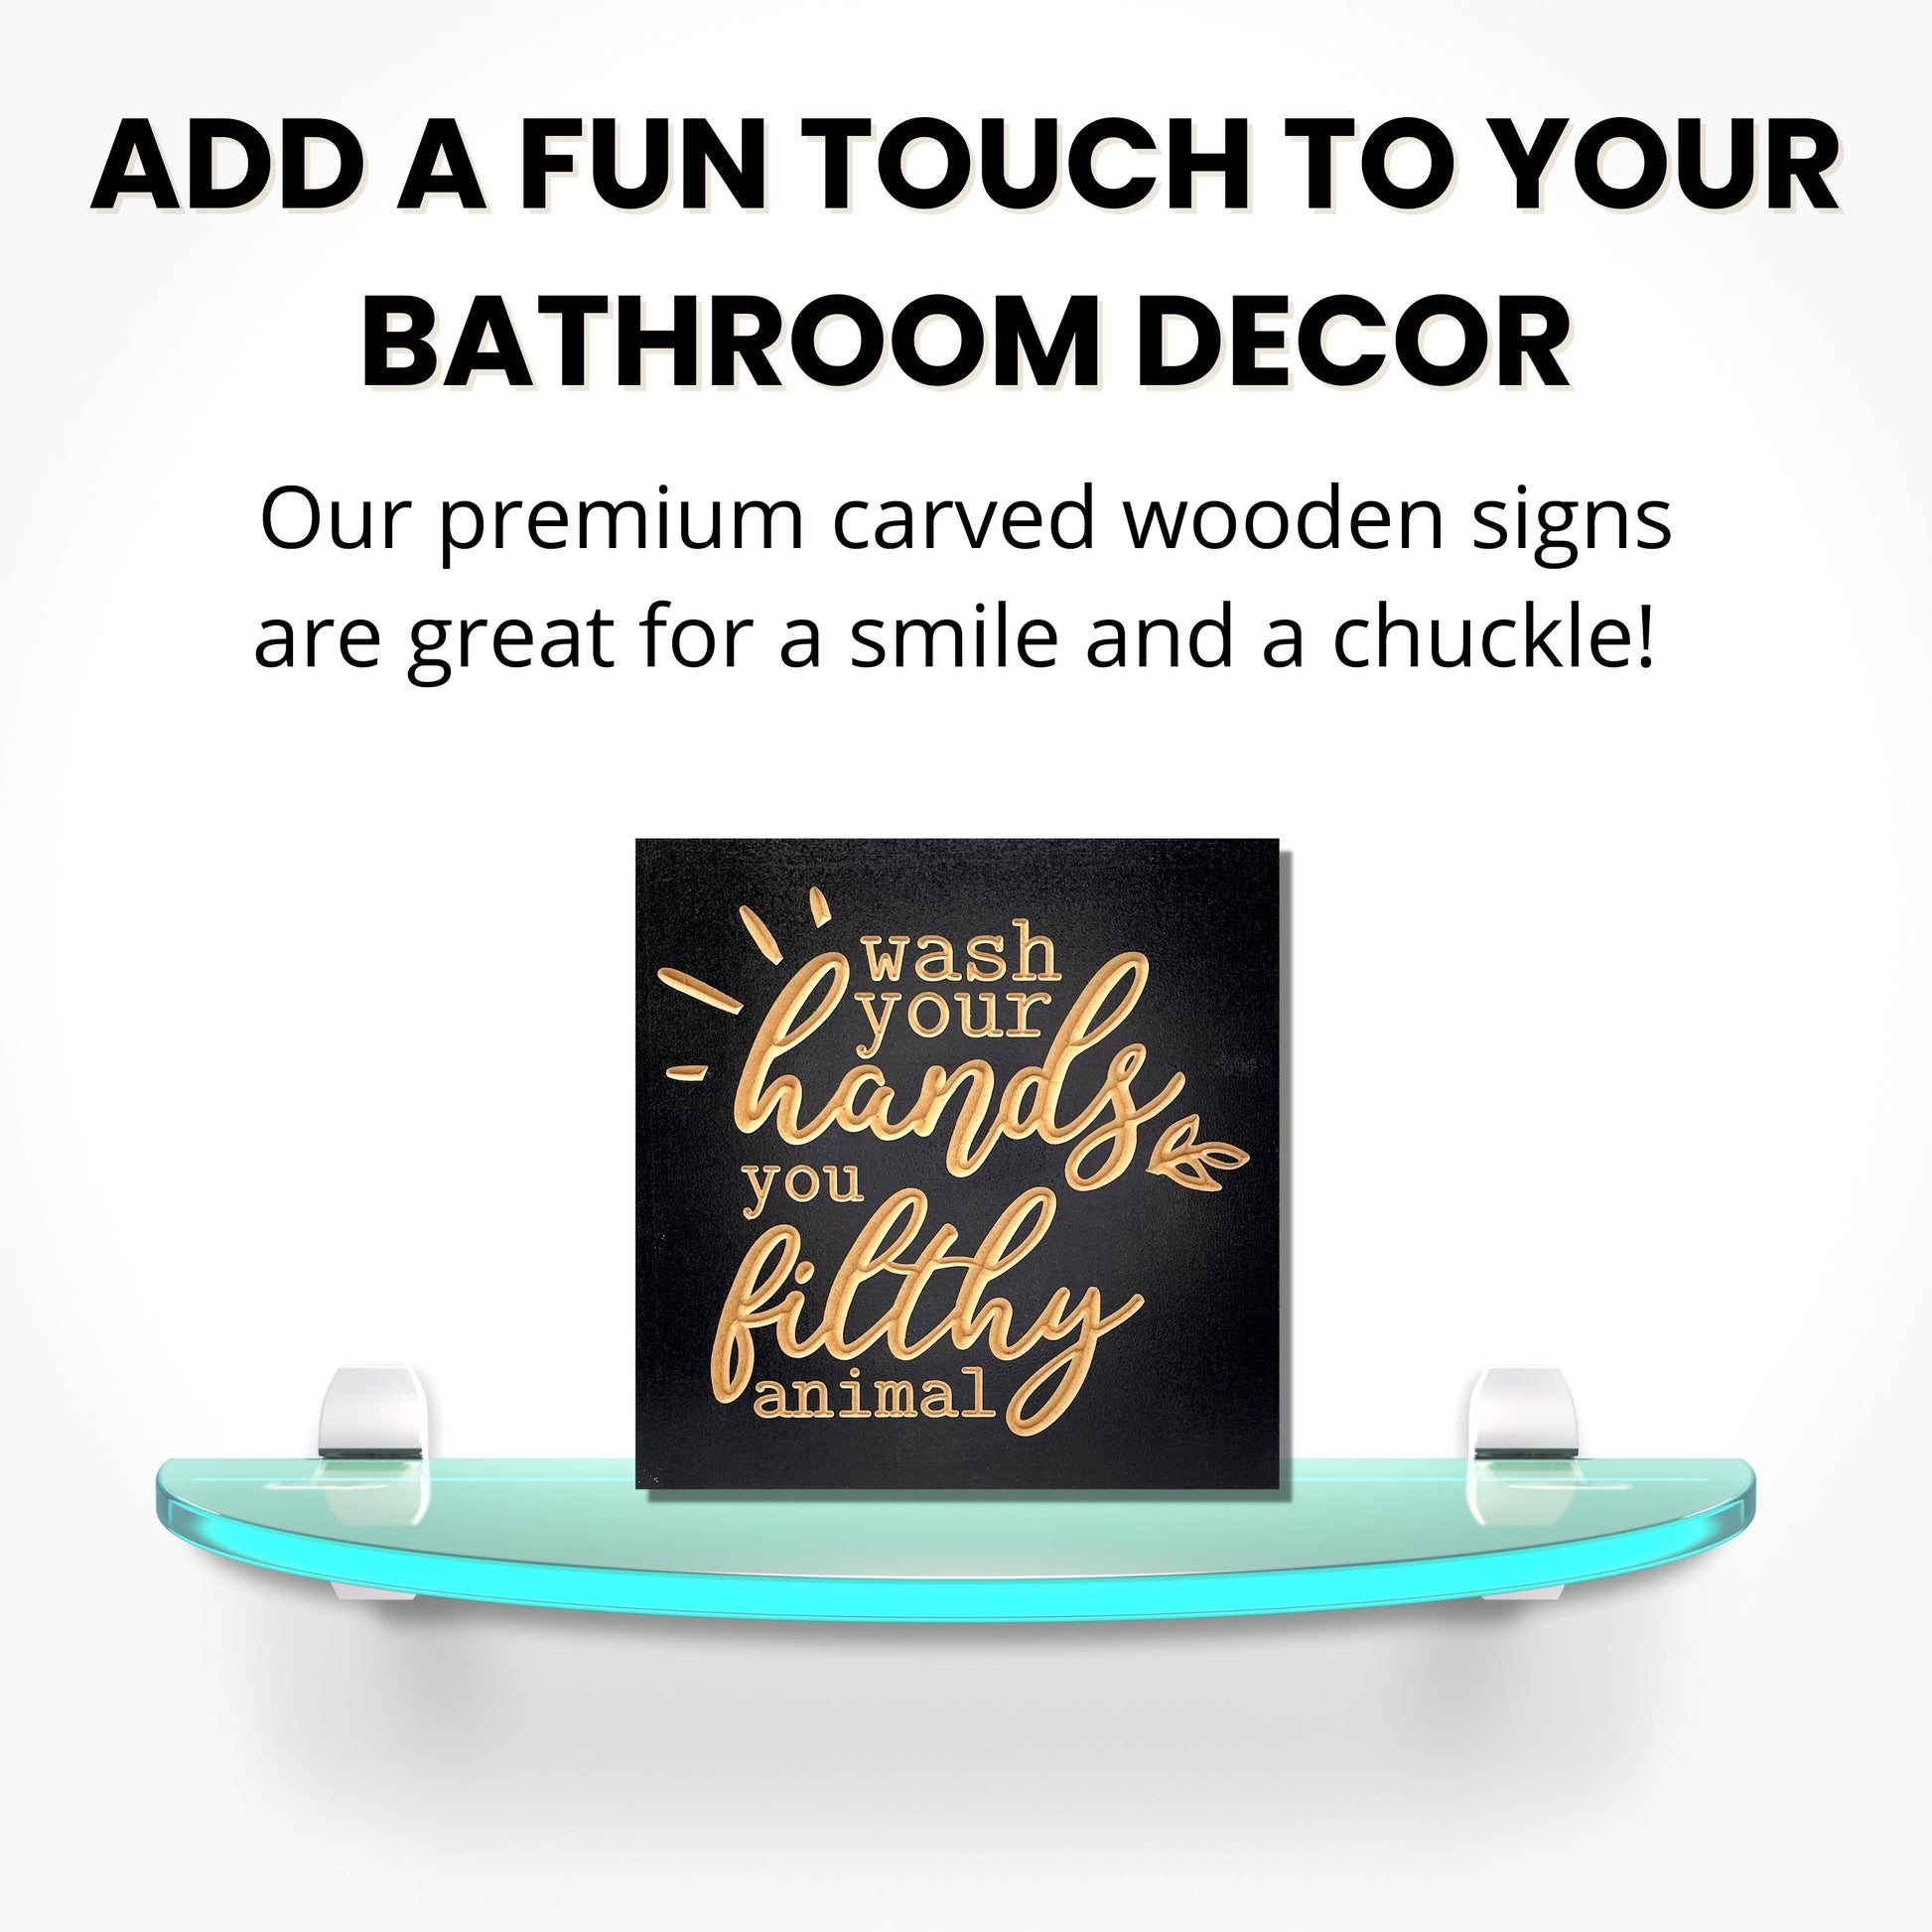 Wash Your Hands You Filty Animal Funny Bathroom Decor Sign